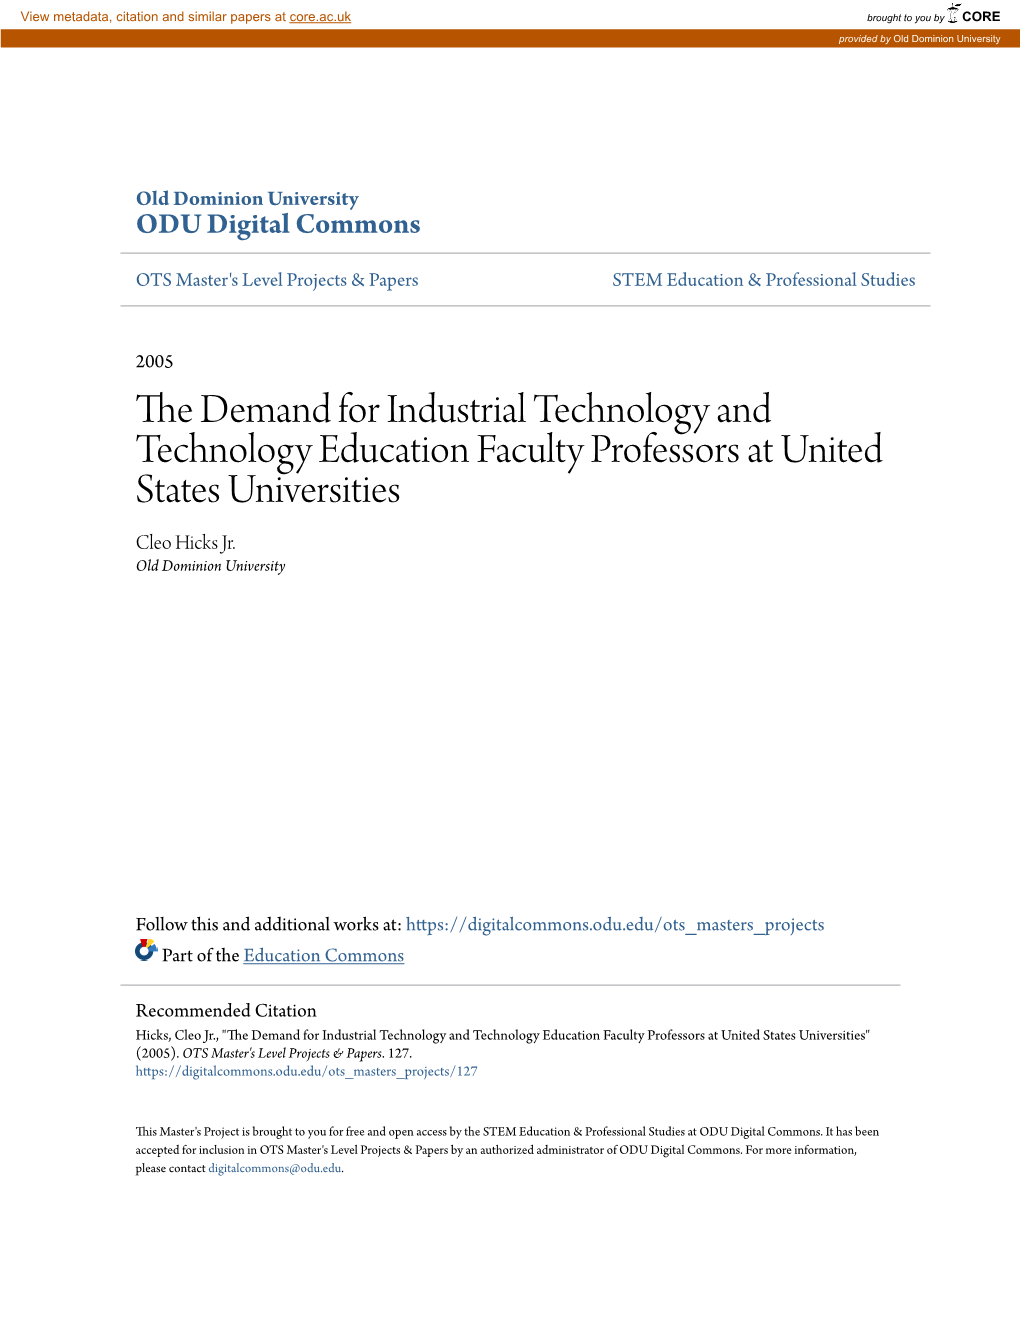 The Demand for Industrial Technology and Technology Education Faculty Professor Positions at United States Universities